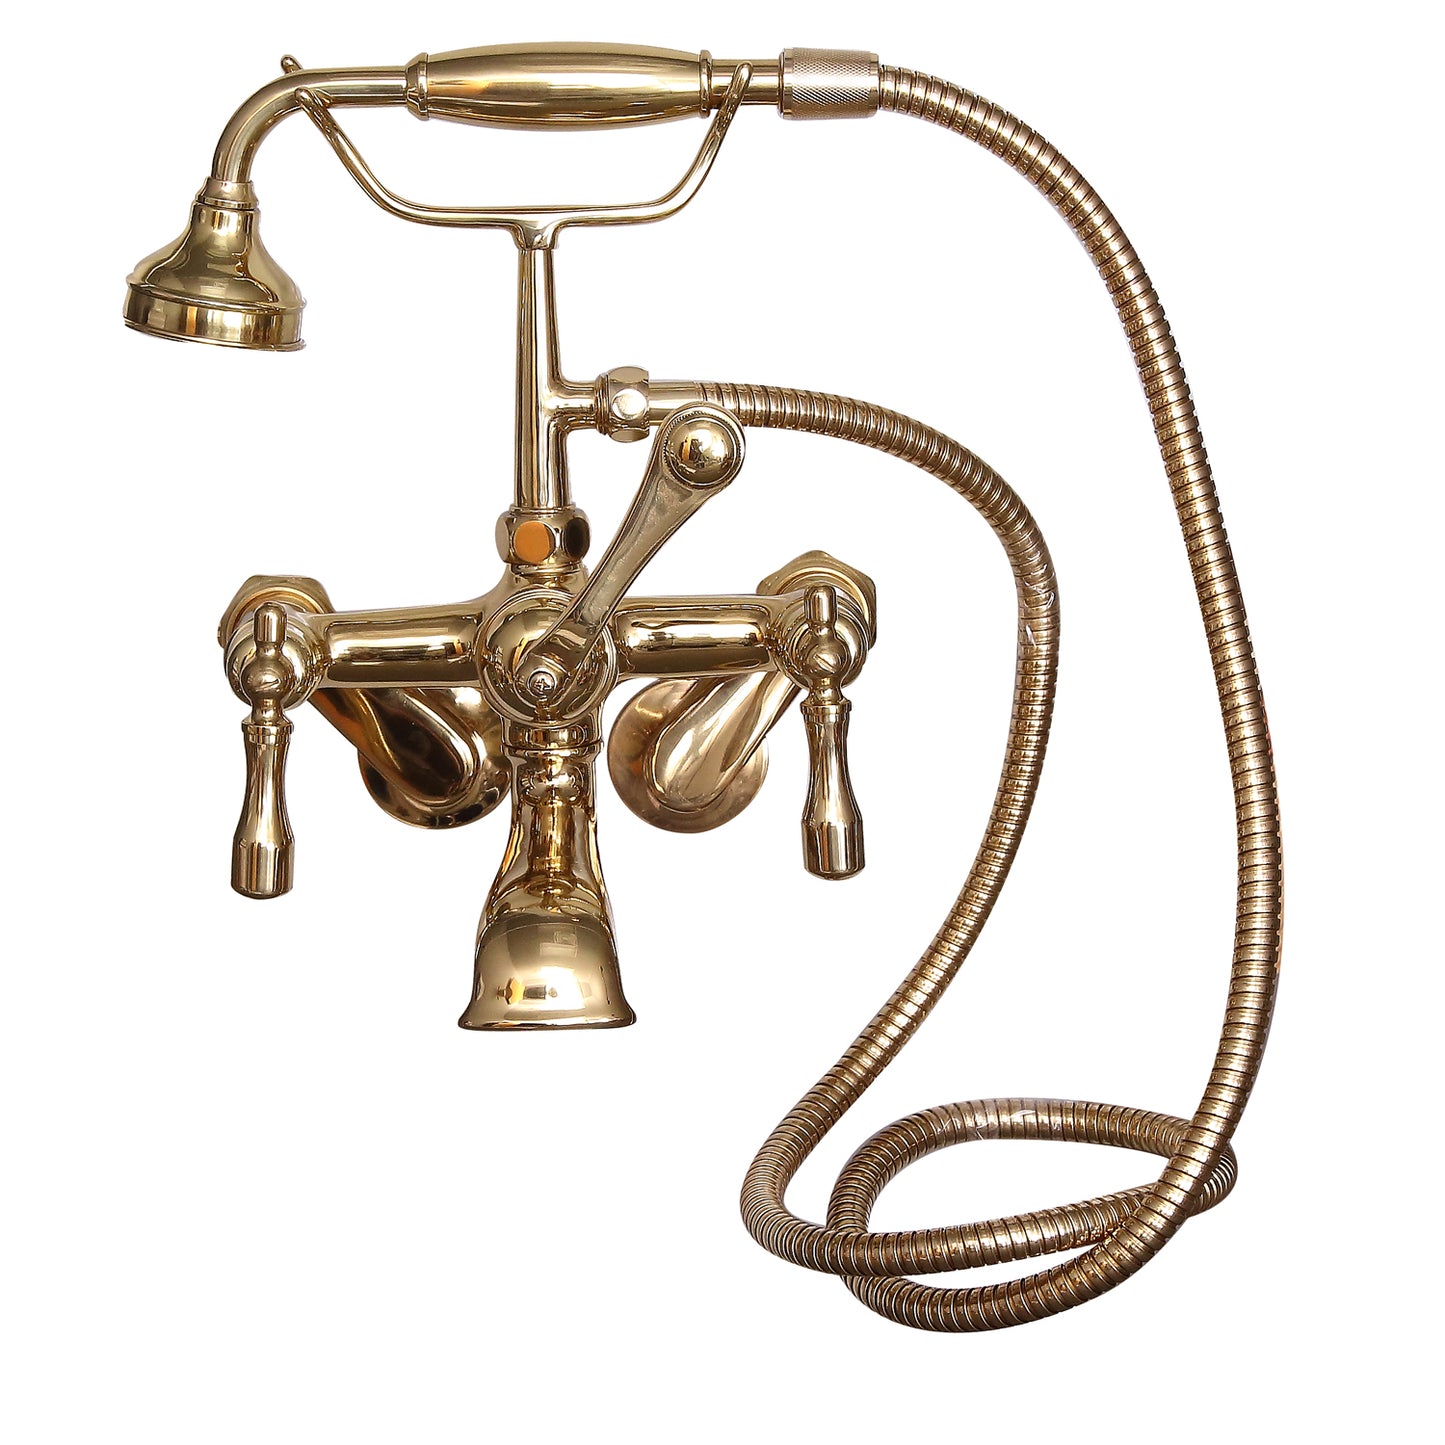 Wide Spout Tub Faucet with Hand Shower, Swivel Wall Mounts, Lever Handles, Polished Brass